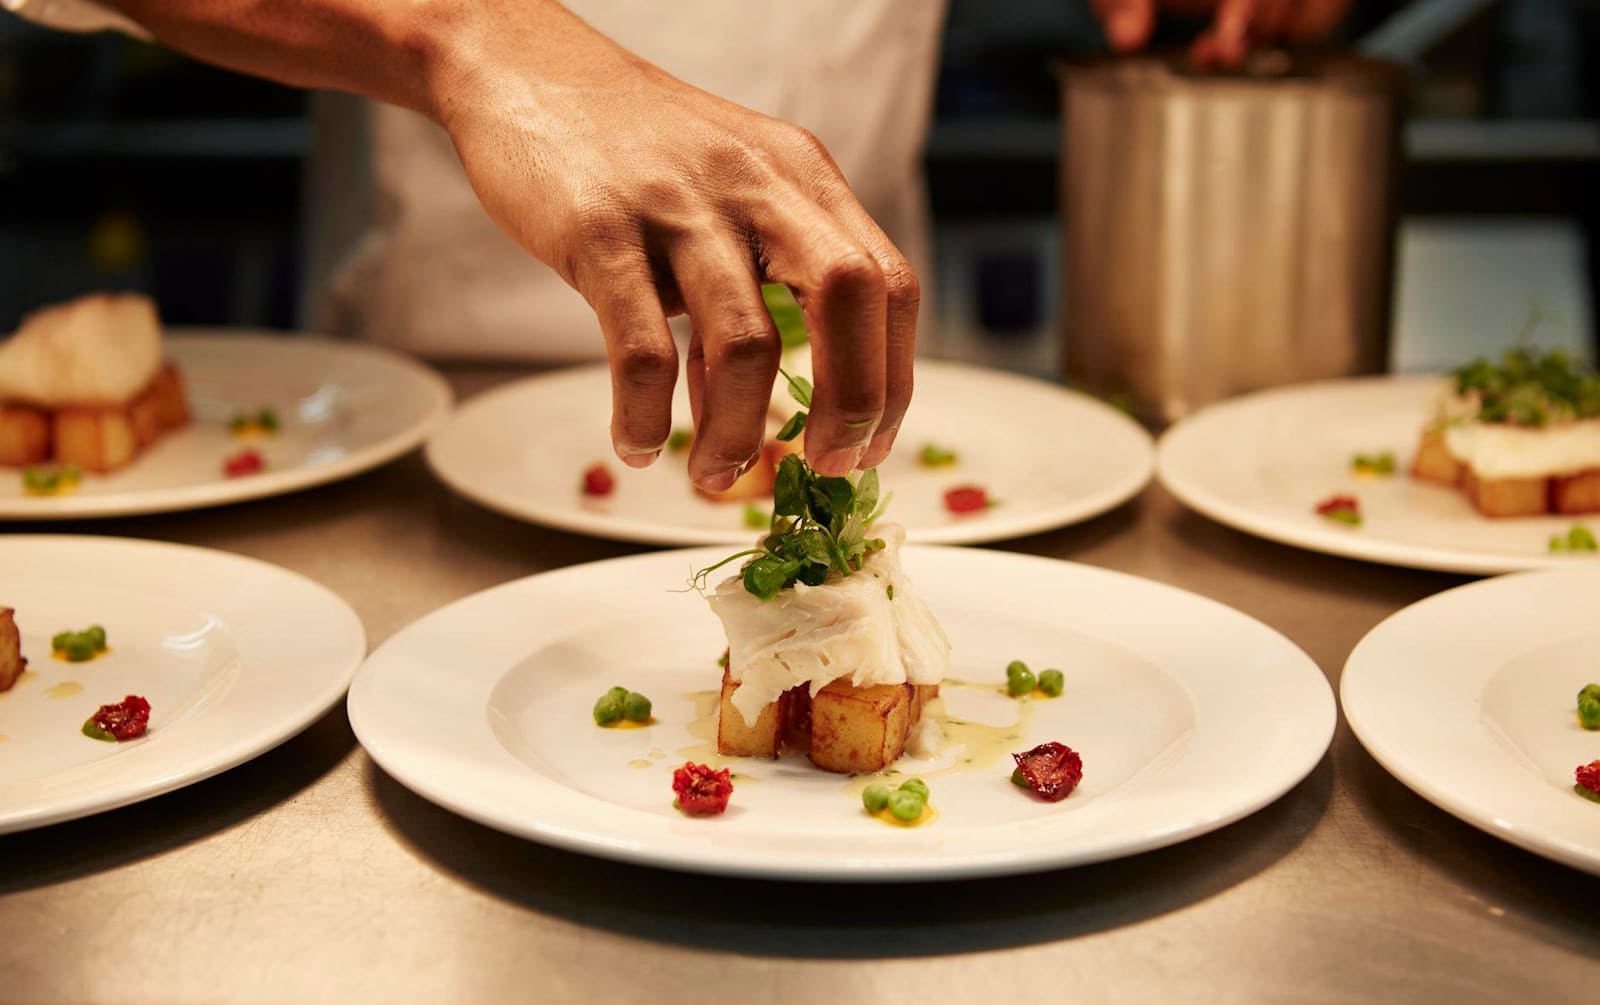 Hand of a chef adding herbs to a meal on a plate